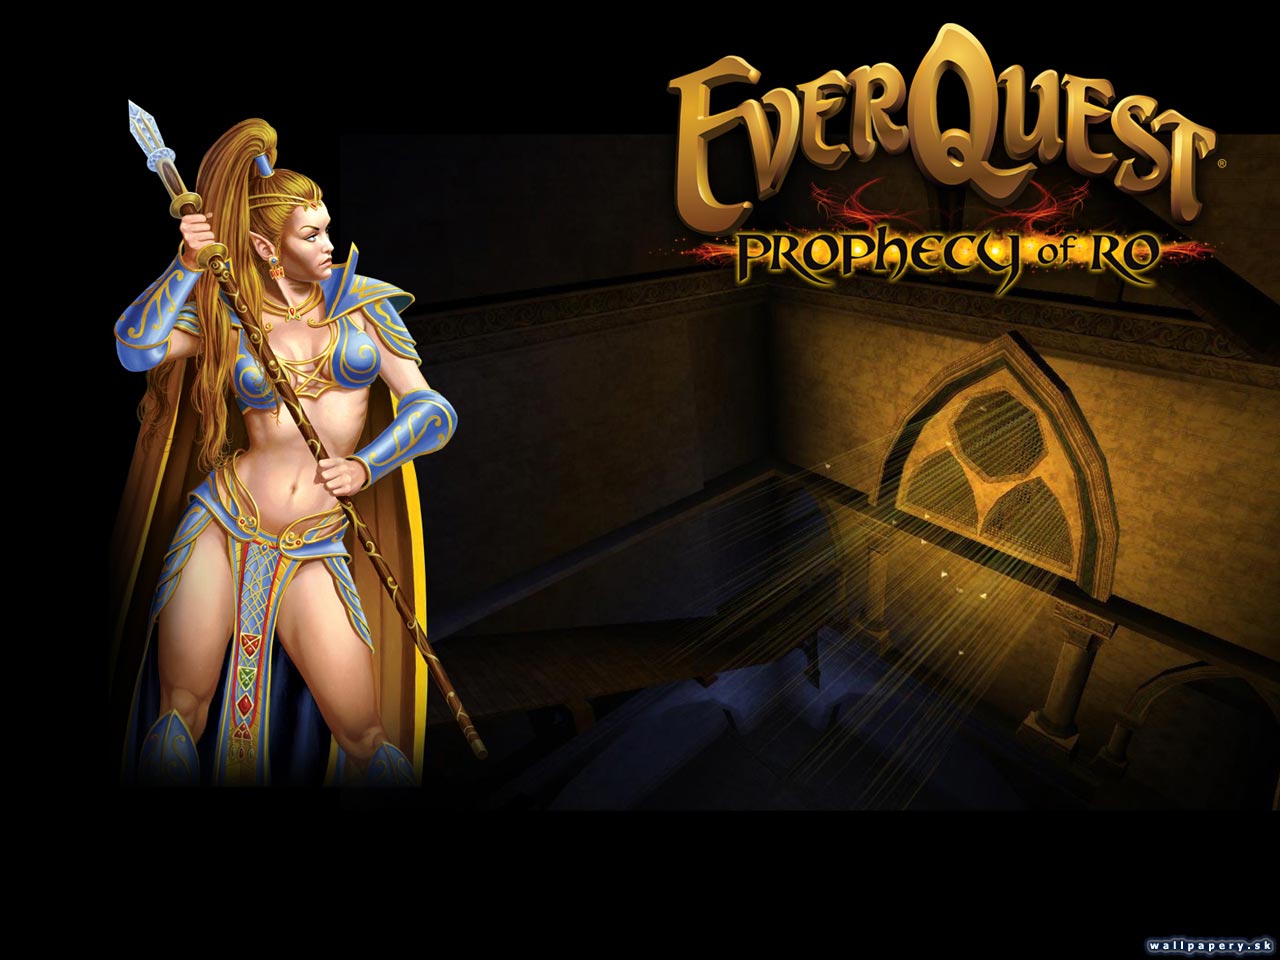 EverQuest: Prophecy of Ro - wallpaper 2